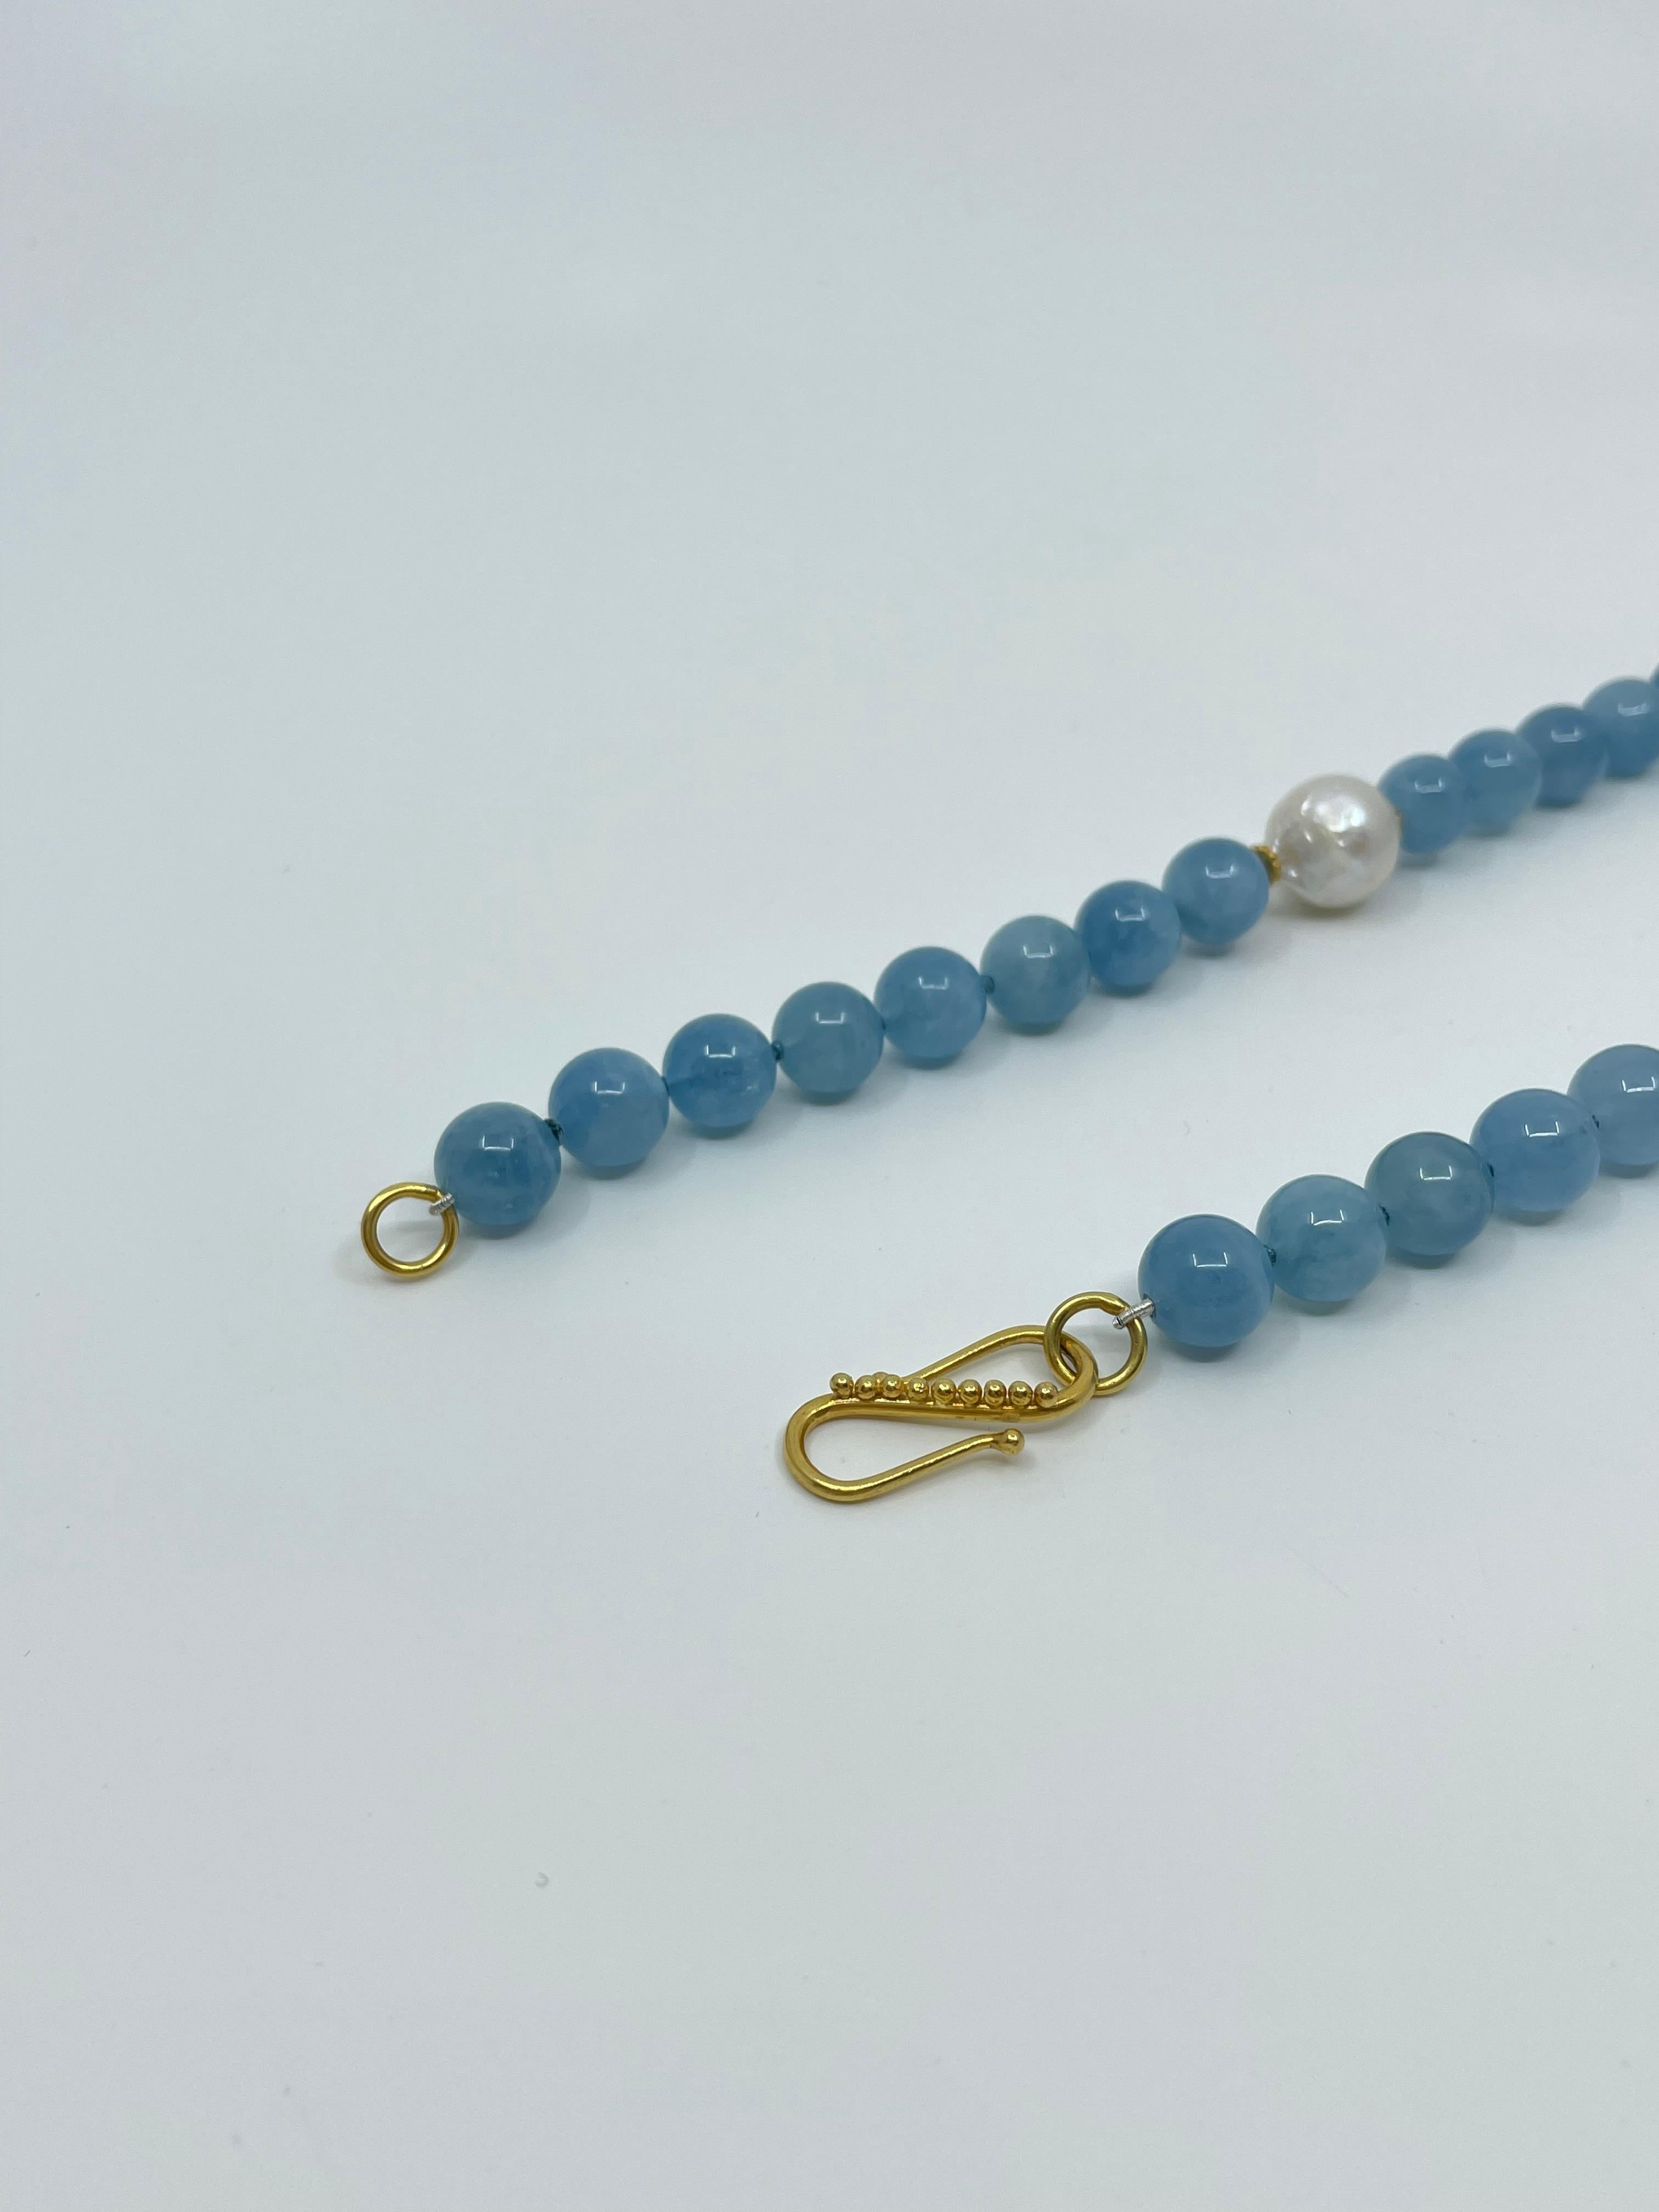 Necklace with Aquamarine, Kyanite, South Sea Pearls, Gold & 18K Gold For Sale 8